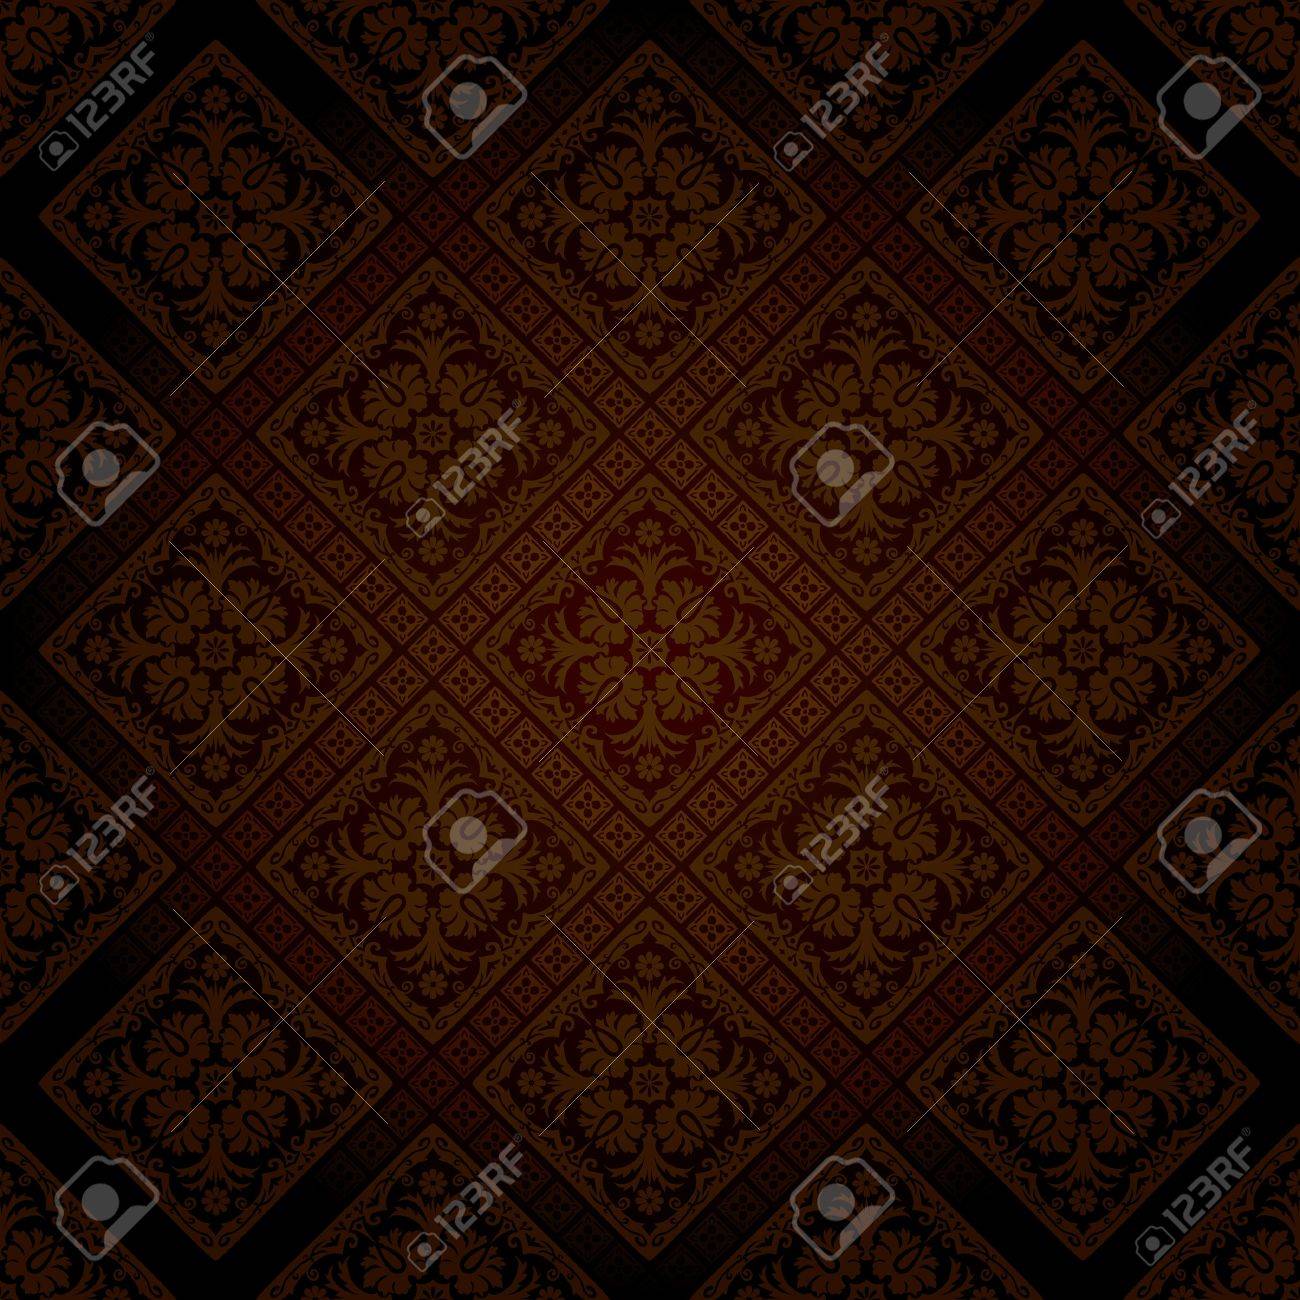 Free Download Seamless Wallpaper In Dark Chocolate Color Royalty Free